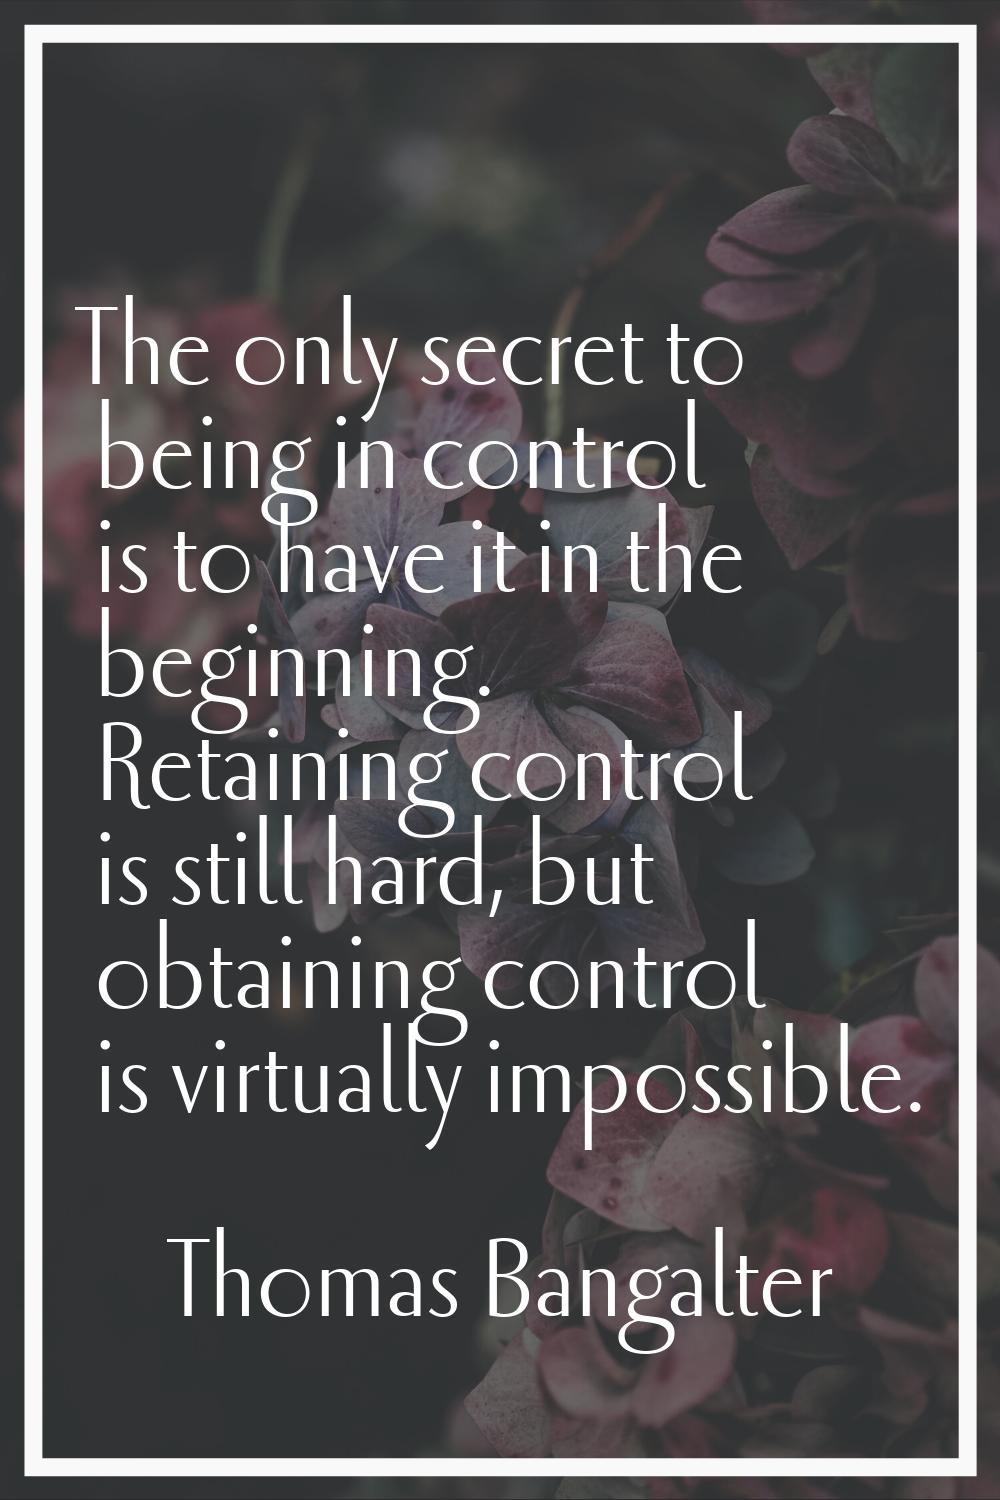 The only secret to being in control is to have it in the beginning. Retaining control is still hard